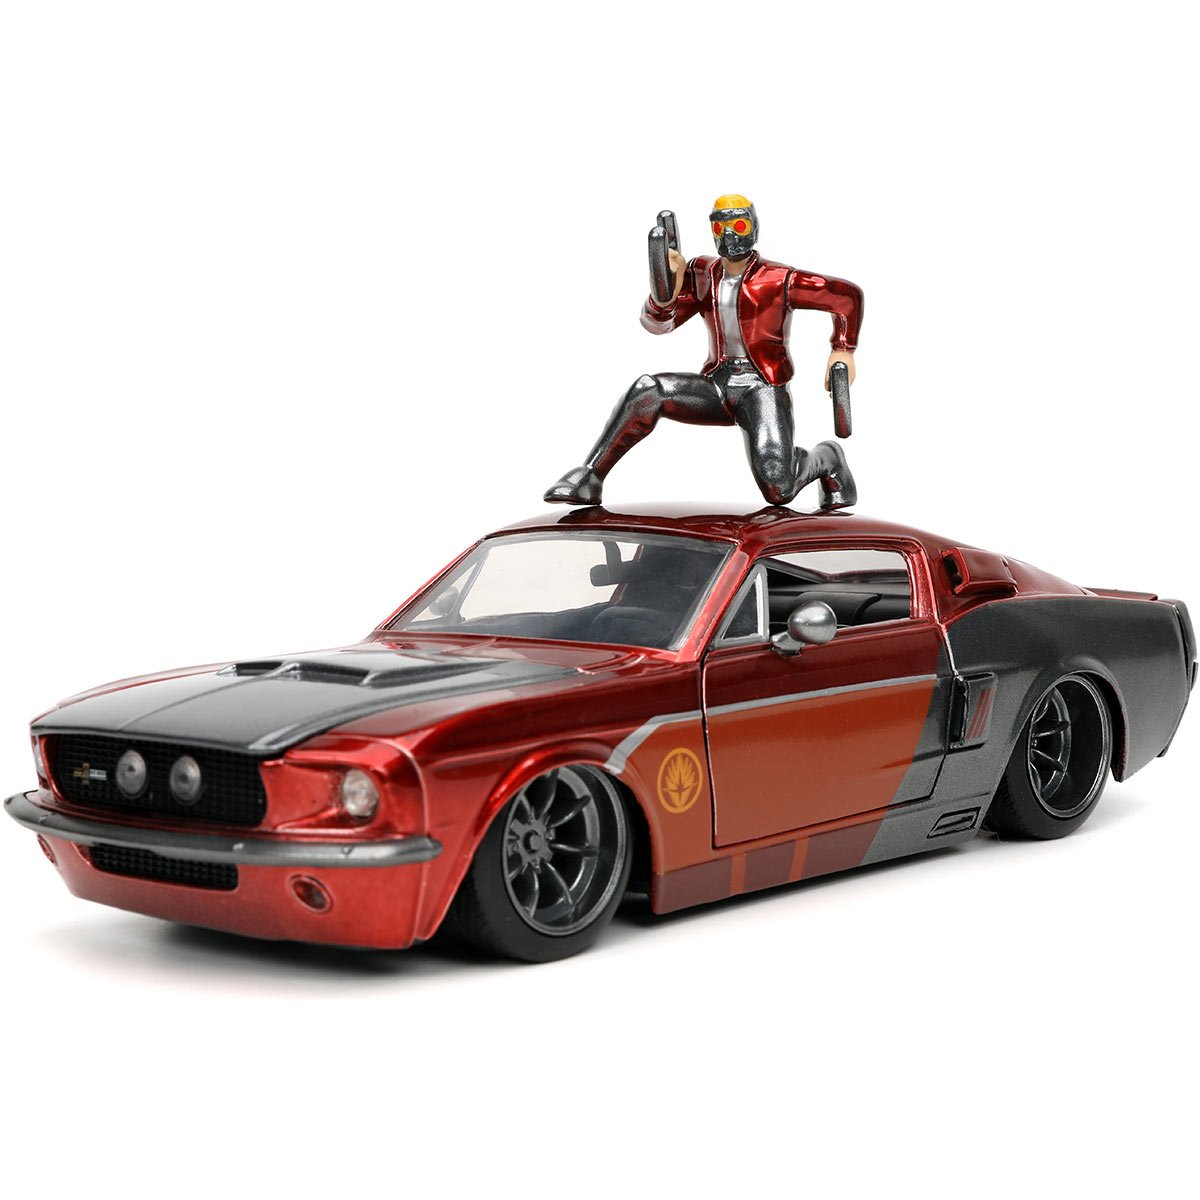 Guardians of the Galaxy - Star-Lord 1967 Mustang Shelby GT-500 1:24 Scale Die-Cast Metal Vehicle